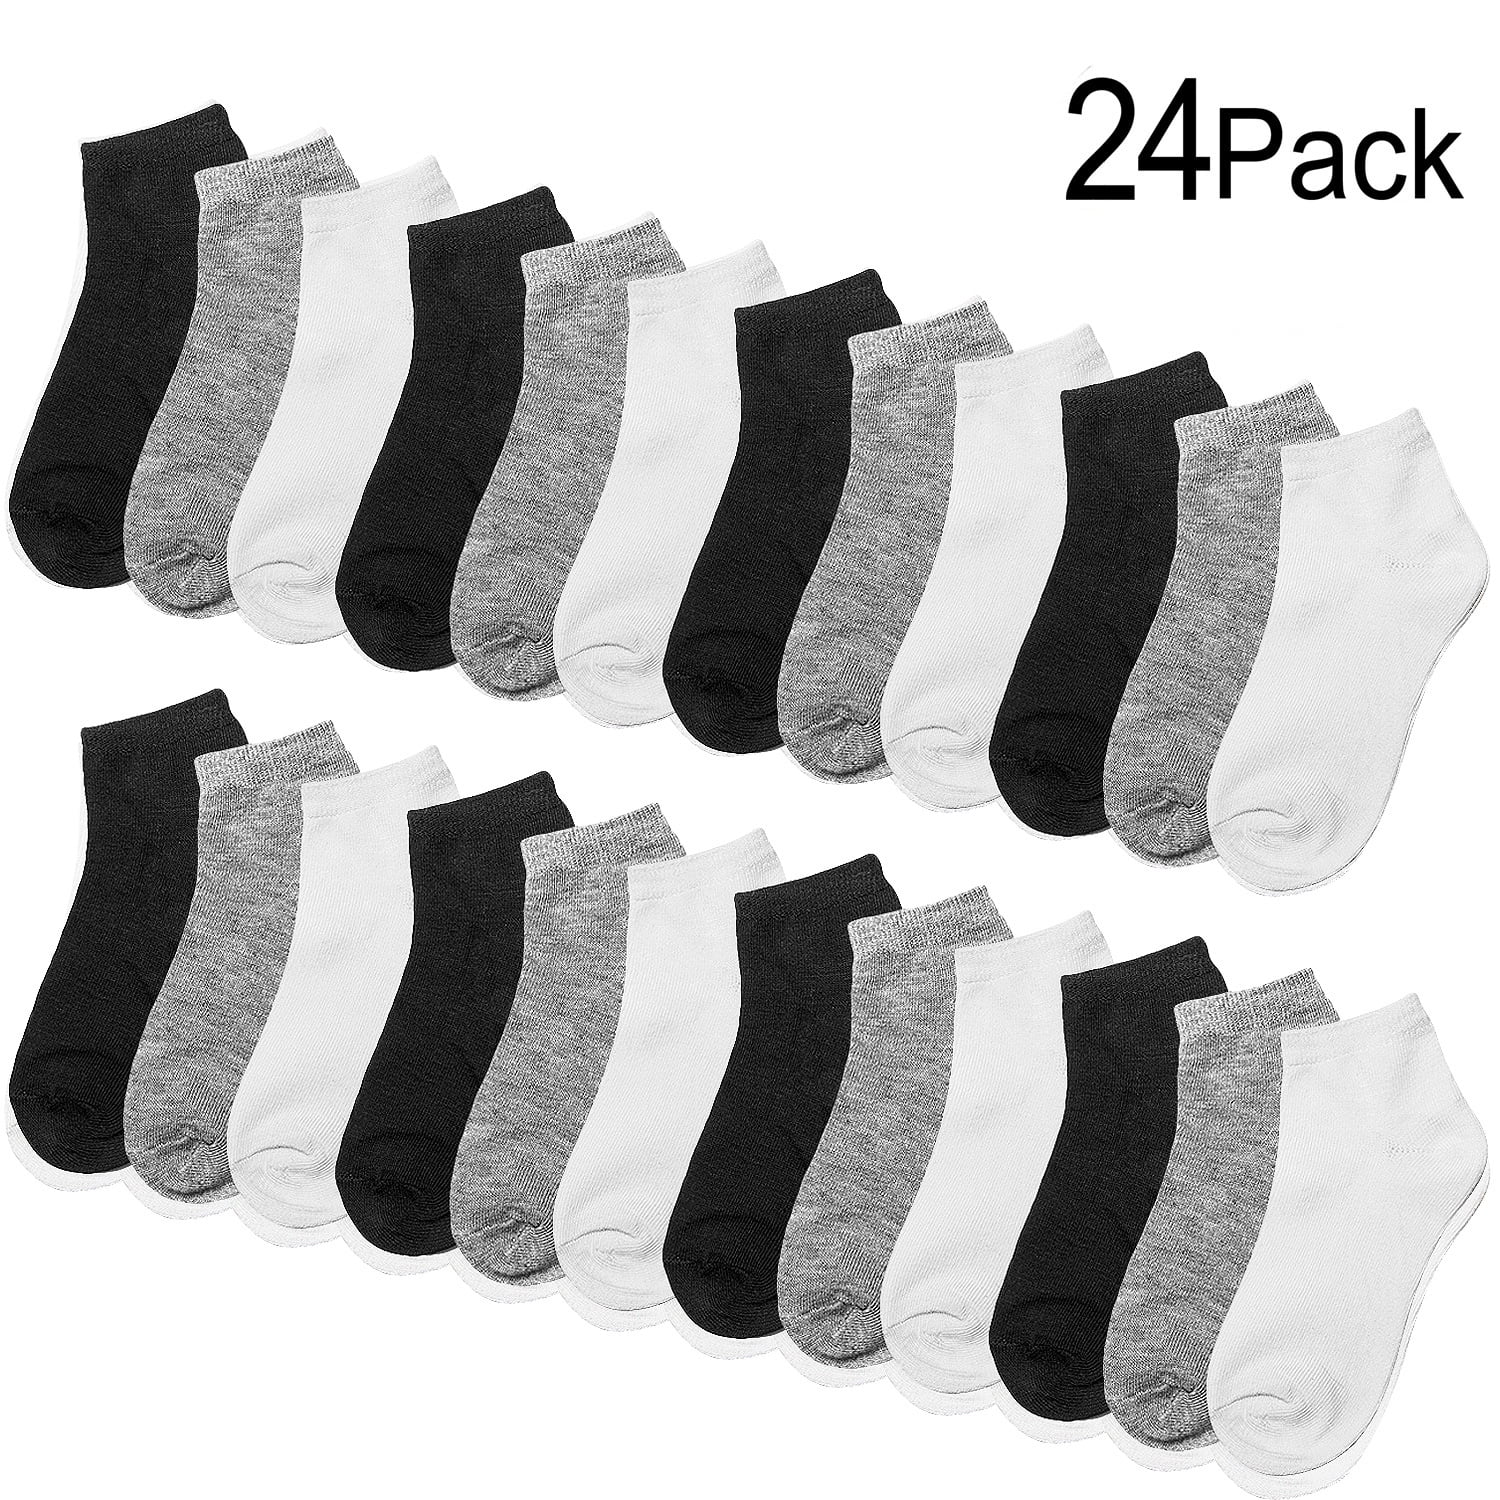 BNWT Boys Perfect Sports Brand Ankle Socks Pack of 5 Size 13-3 Age 8-10 Years 